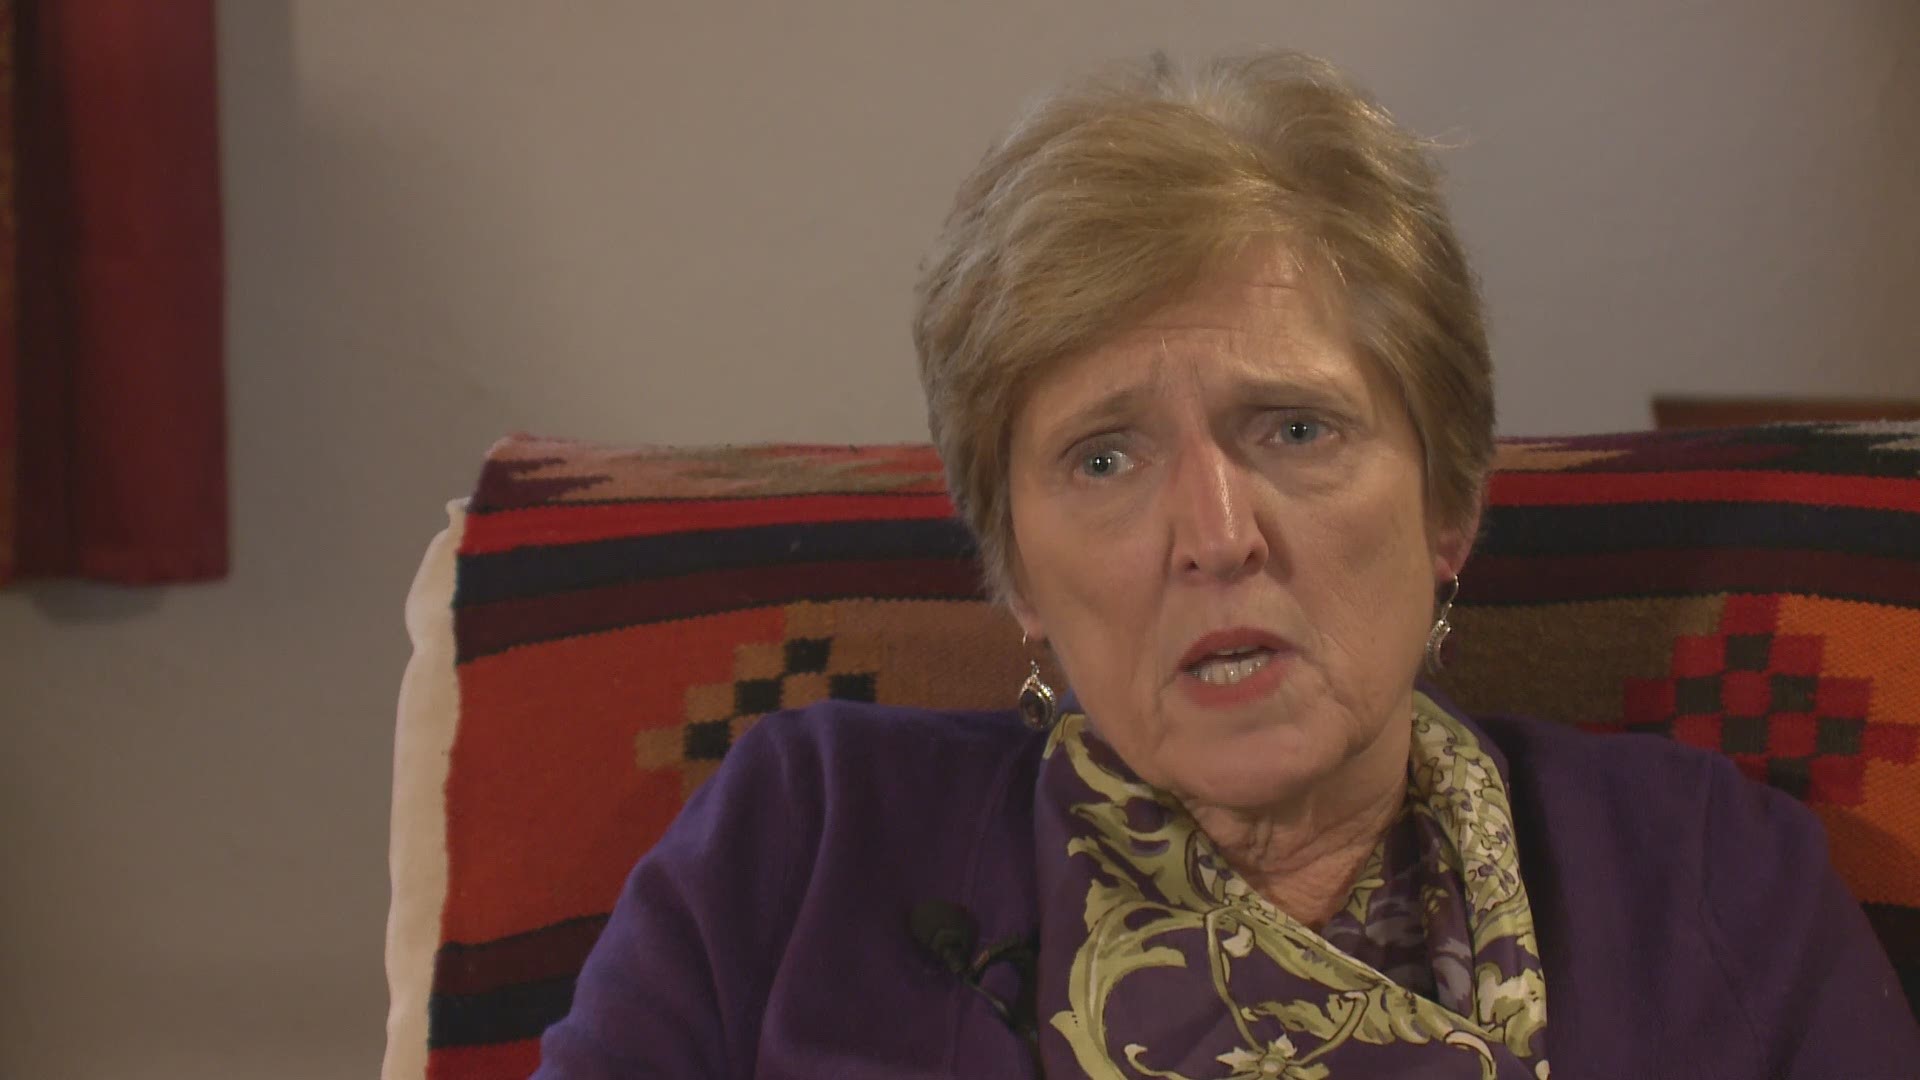 Dr. Greg Miday's mom, Karen Miday talks about her son's interaction with his patients.